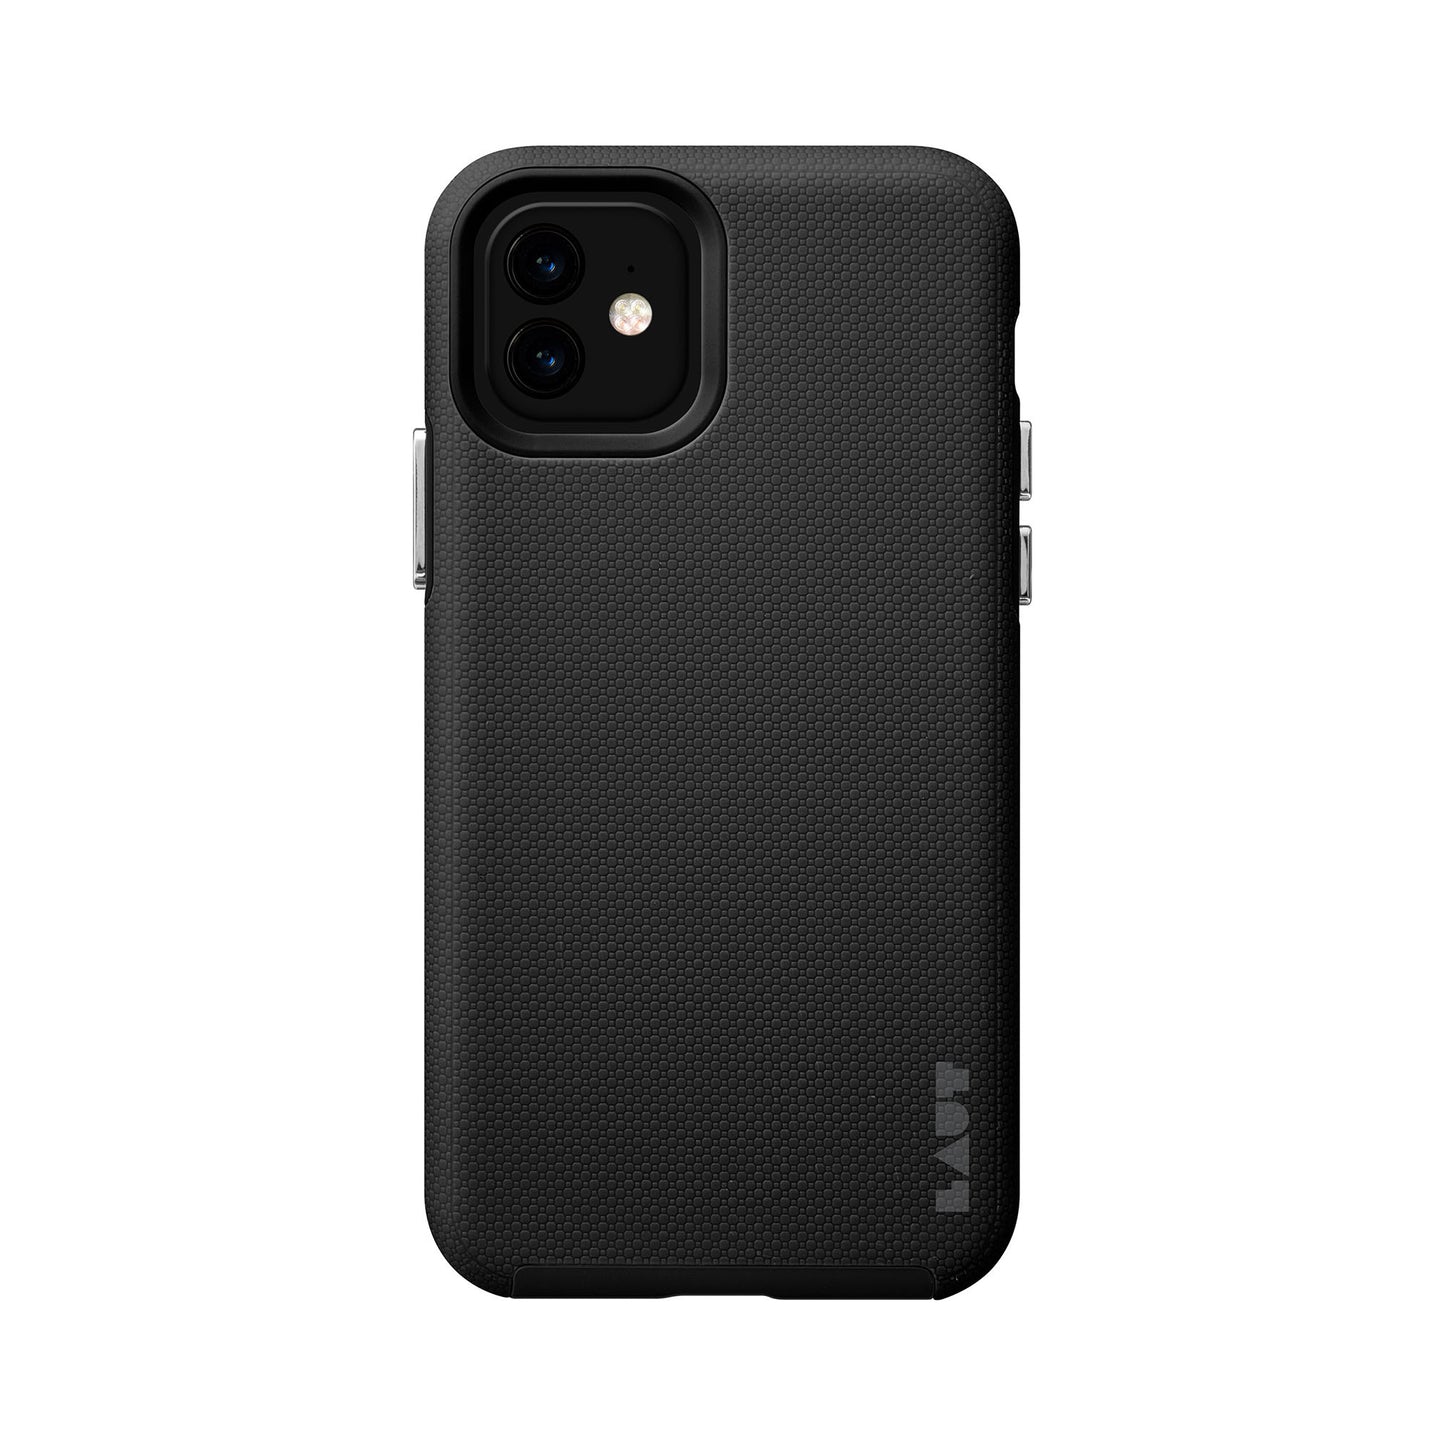 LAUT Shield for iPhone 11 - Black